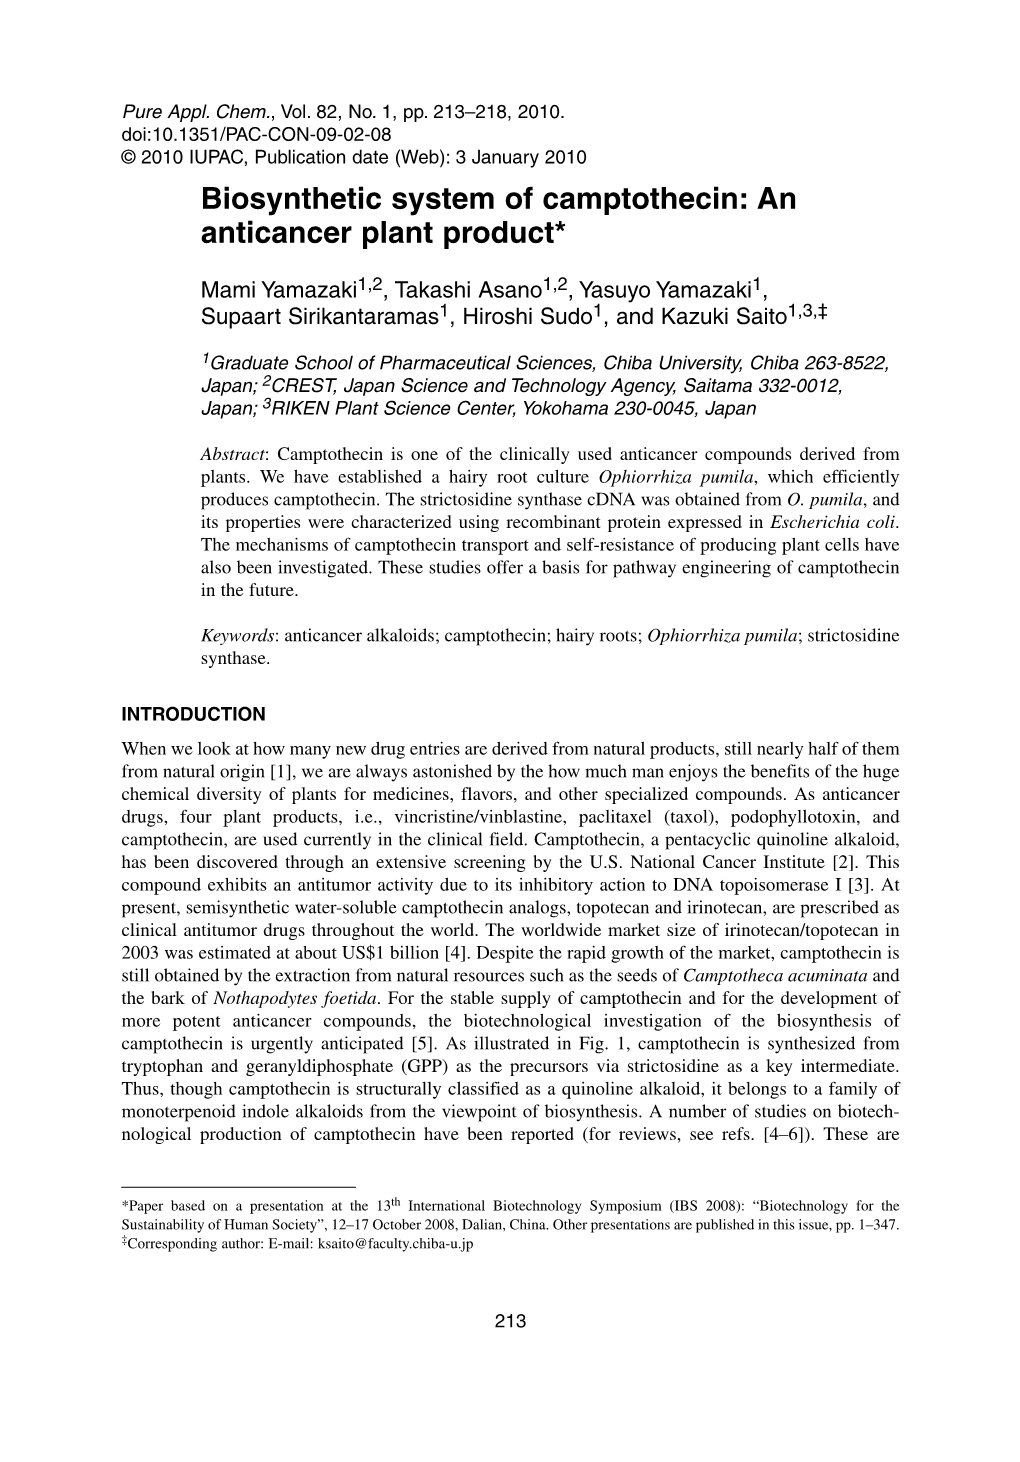 Biosynthetic System of Camptothecin: an Anticancer Plant Product*